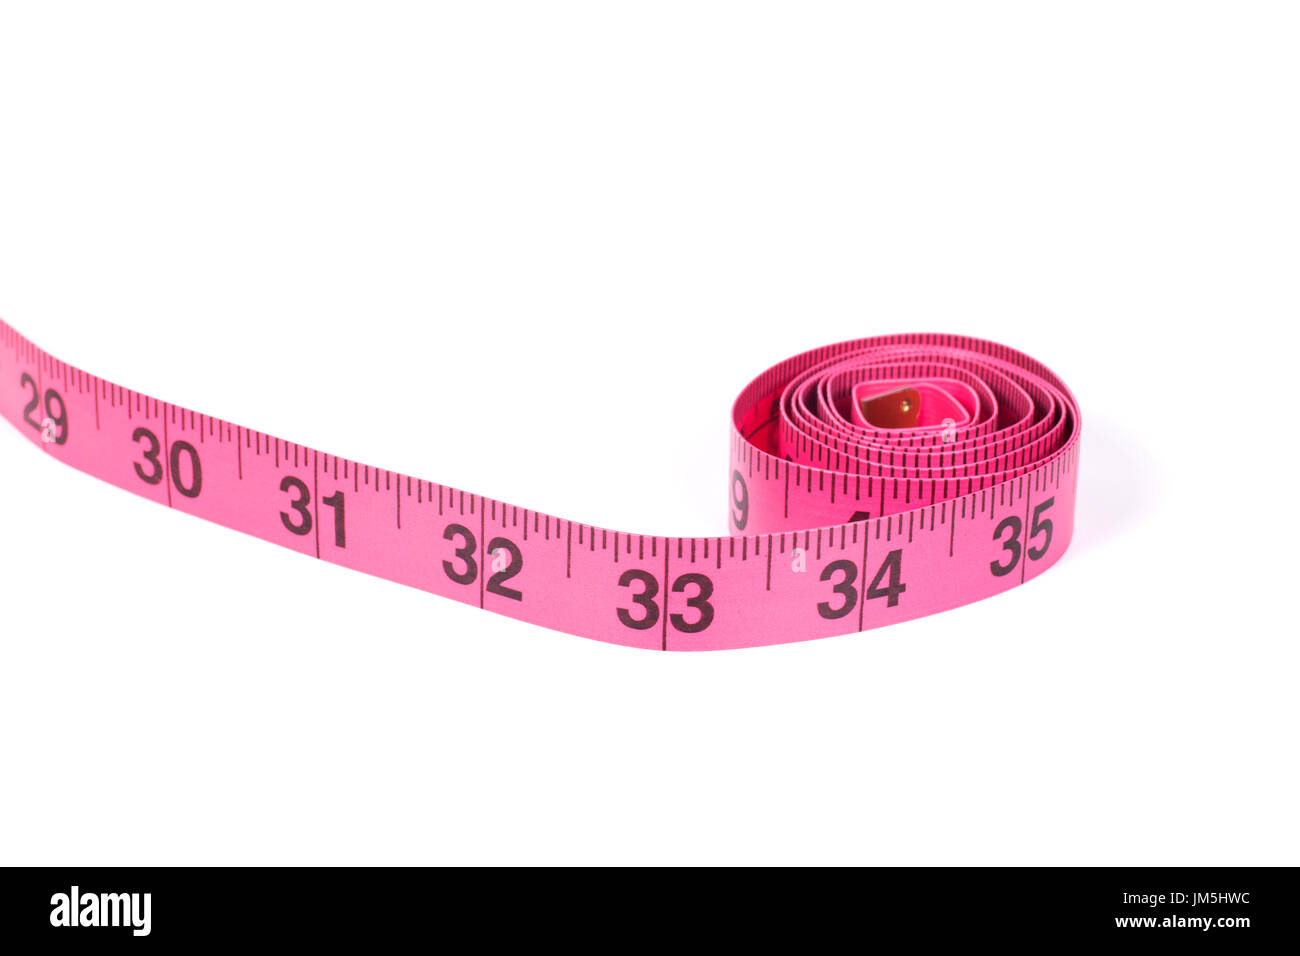 Pink measuring tape roll marked in inches with one end going outside the frame, close-up isolated on white background with copy space Stock Photo